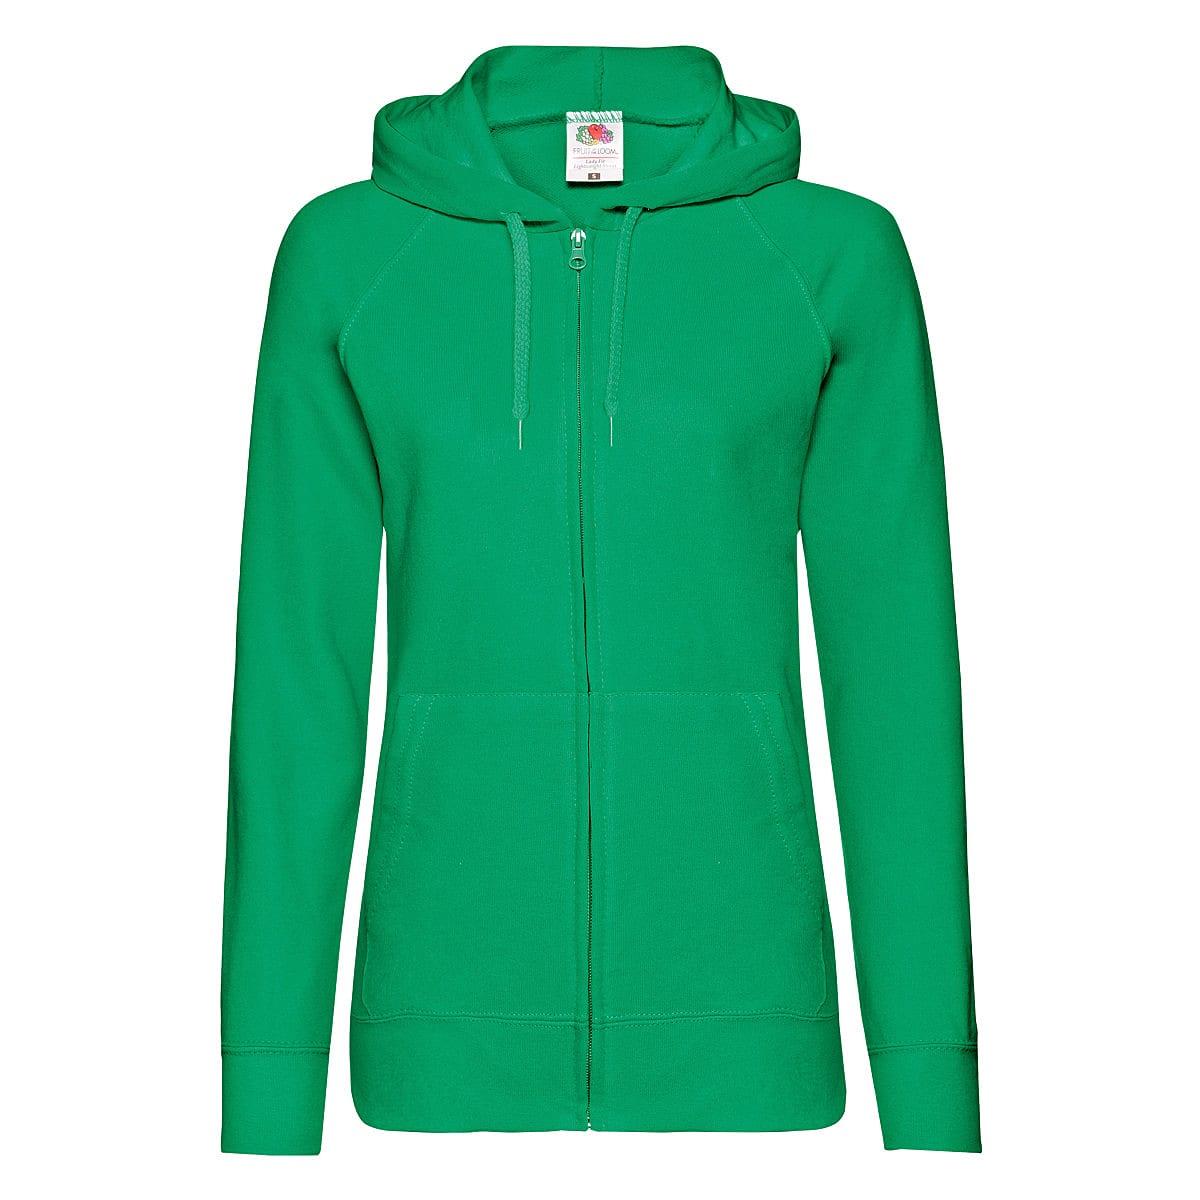 Fruit Of The Loom Lady-Fit Lightweight Full-Zip Hoodie in Kelly Green (Product Code: 62150)